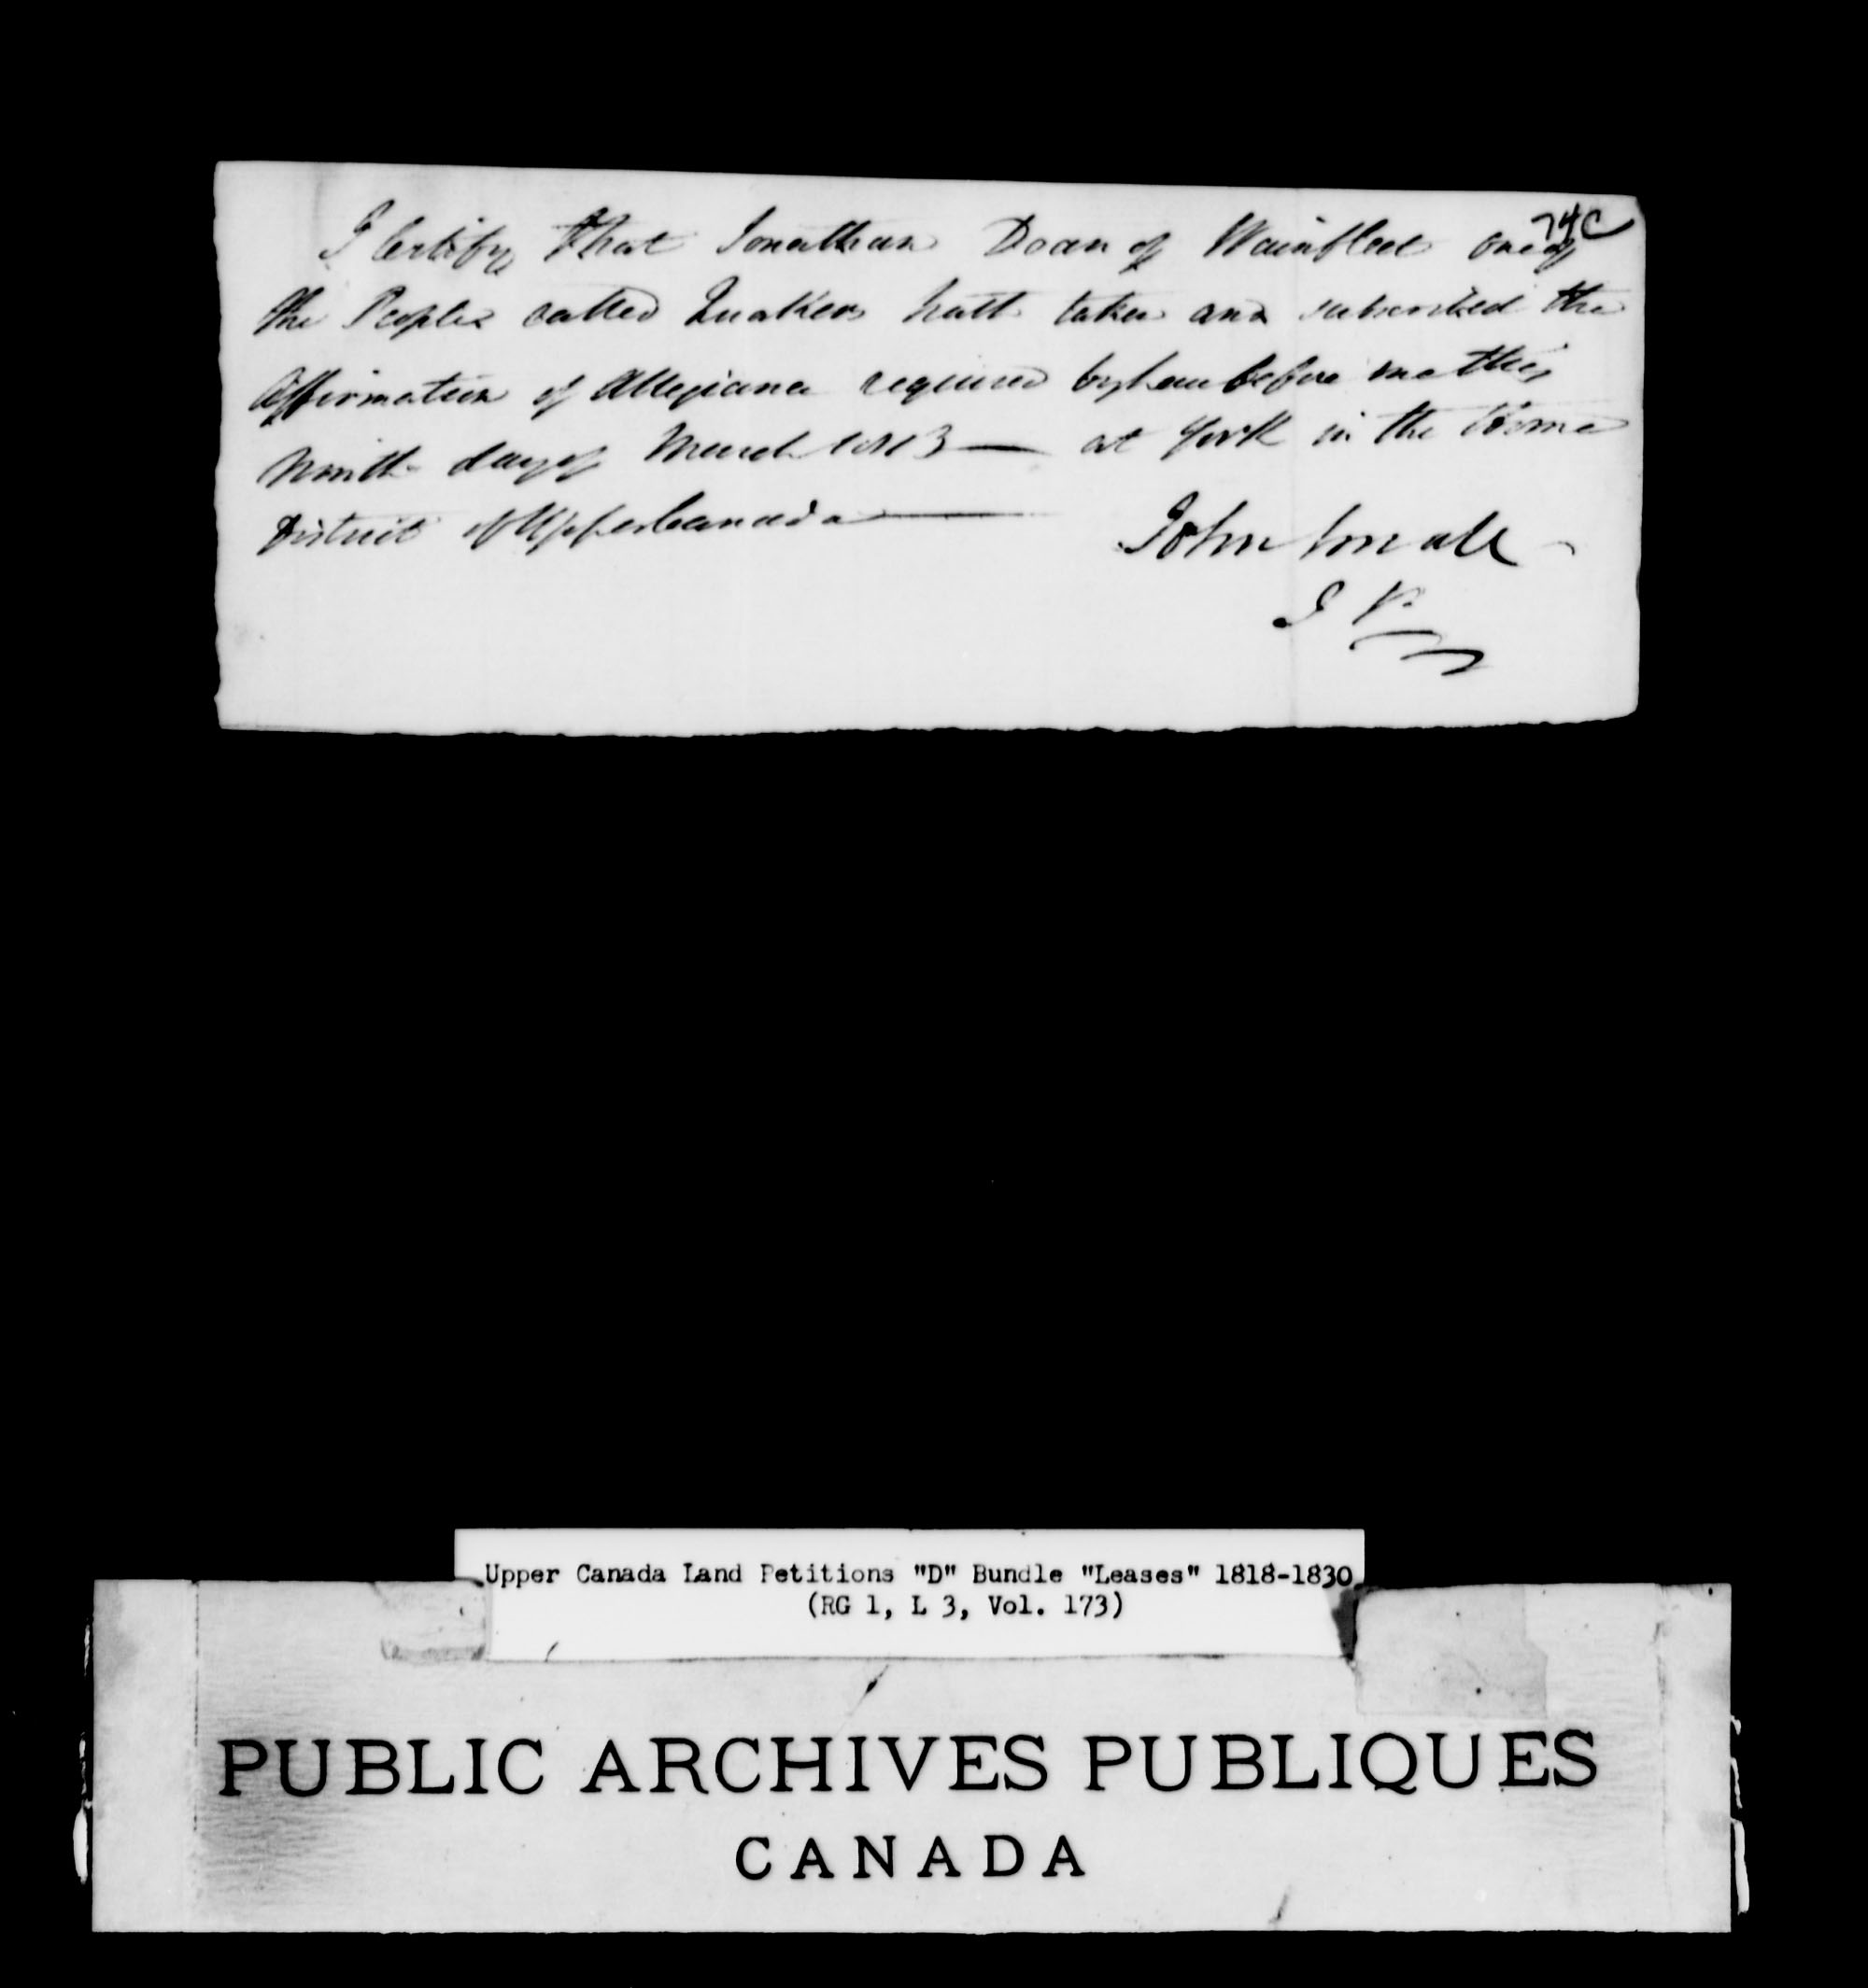 Title: Upper Canada Land Petitions (1763-1865) - Mikan Number: 205131 - Microform: c-1886